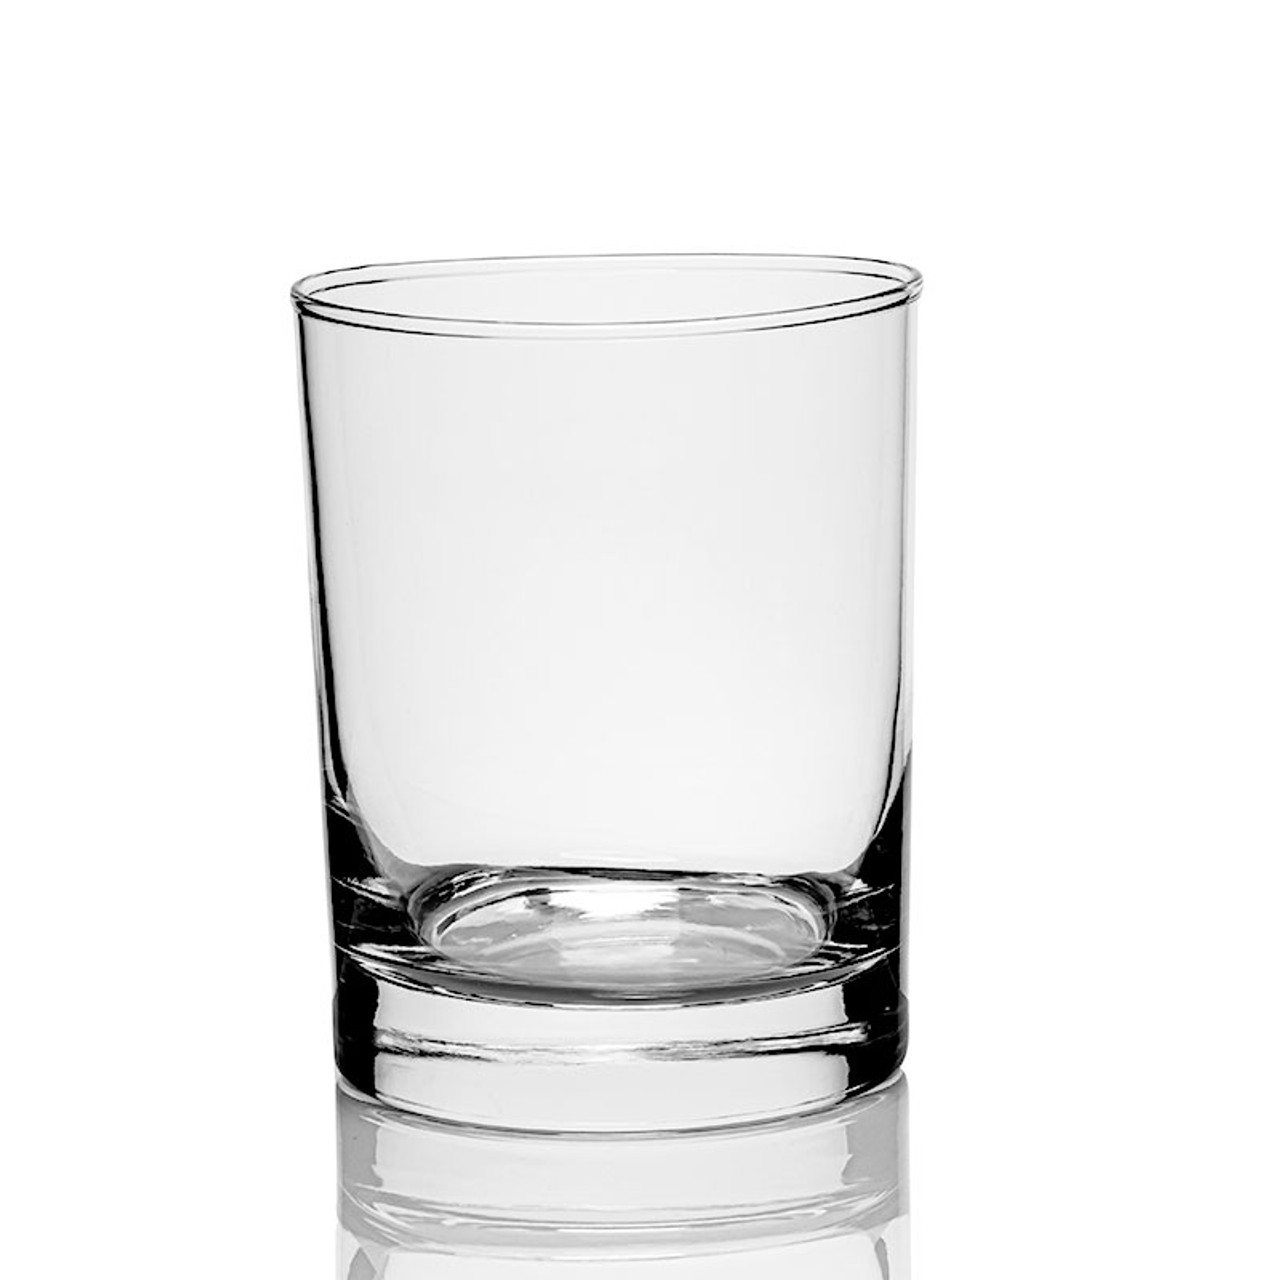 Large Rocks Clear Multi Colored Base Drinking Glass for Water, Juice, Beer,  Whiskey, and Cocktails, 16 Ounce - Set of 6